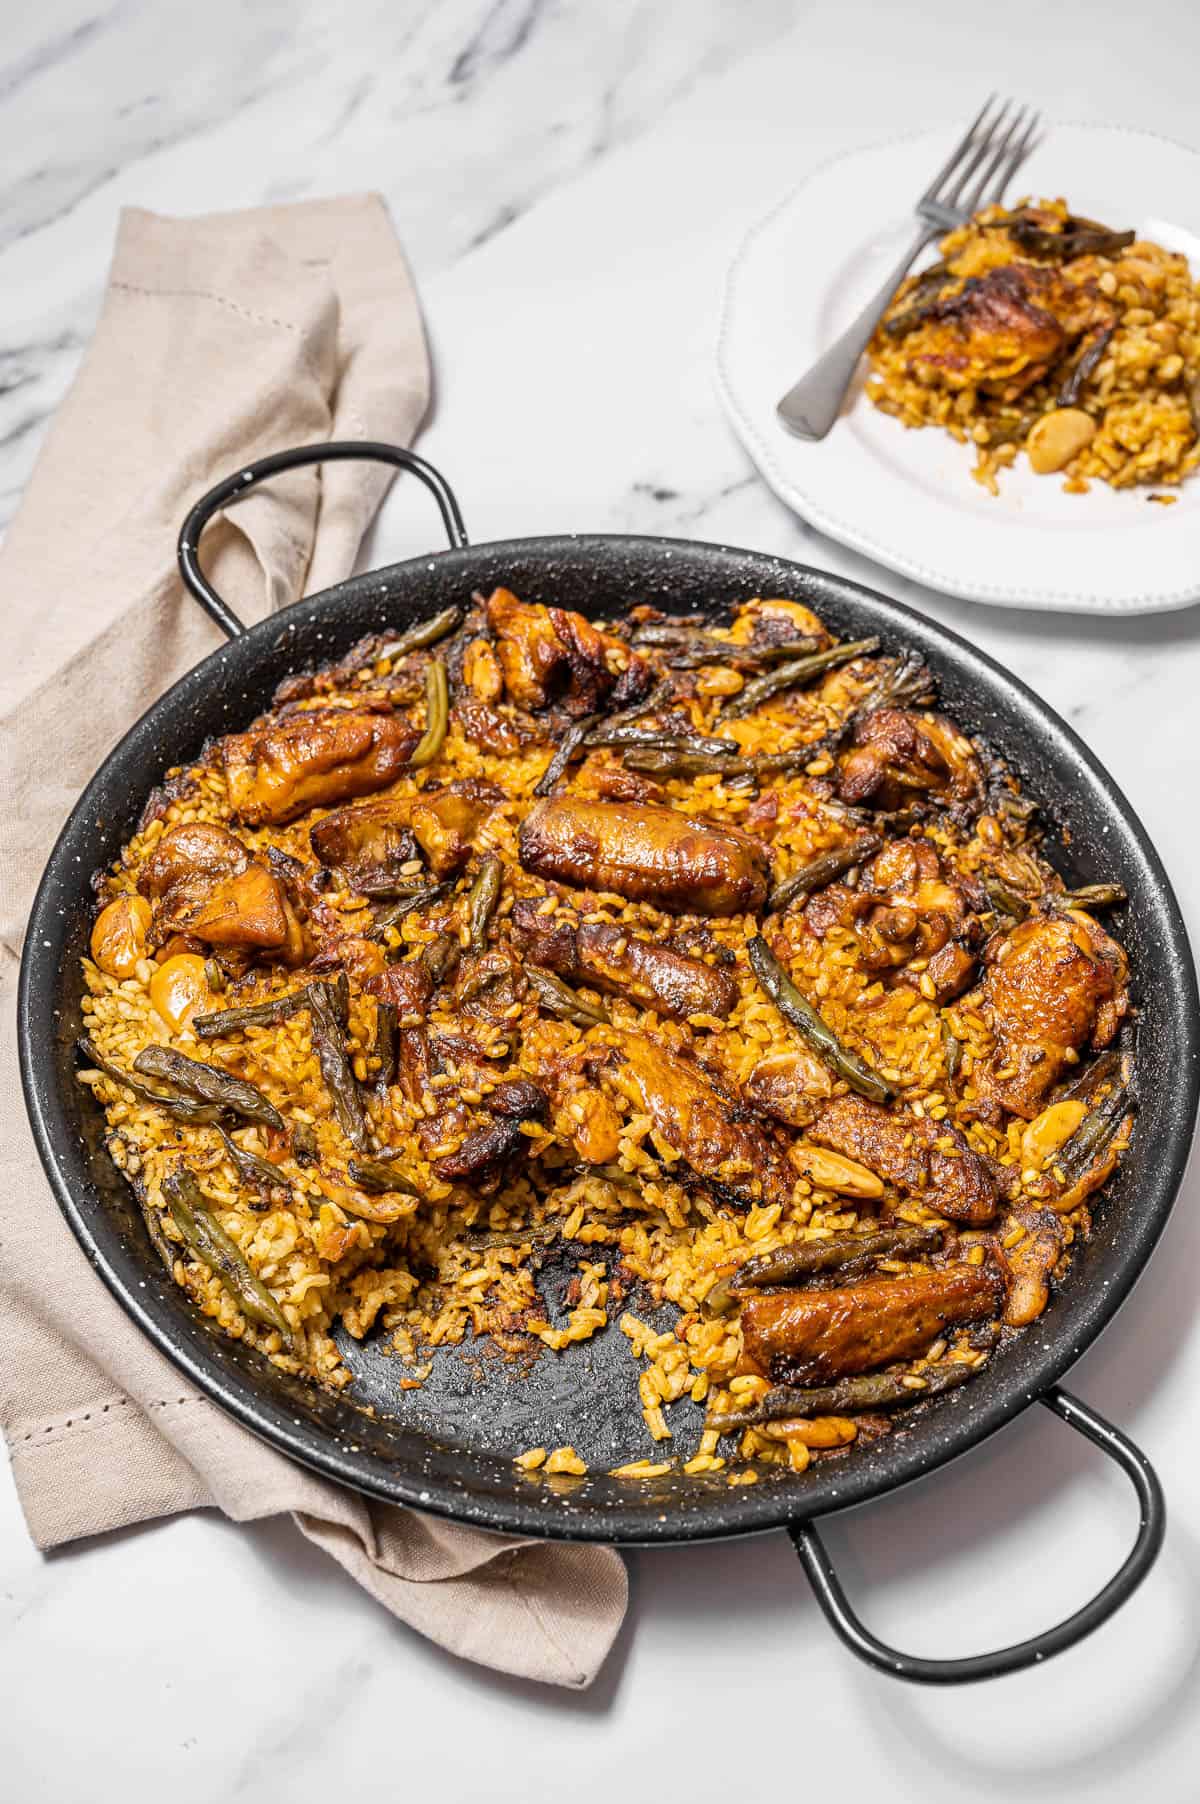 A large pan of Paella Valenciana with one portion plated behind it.